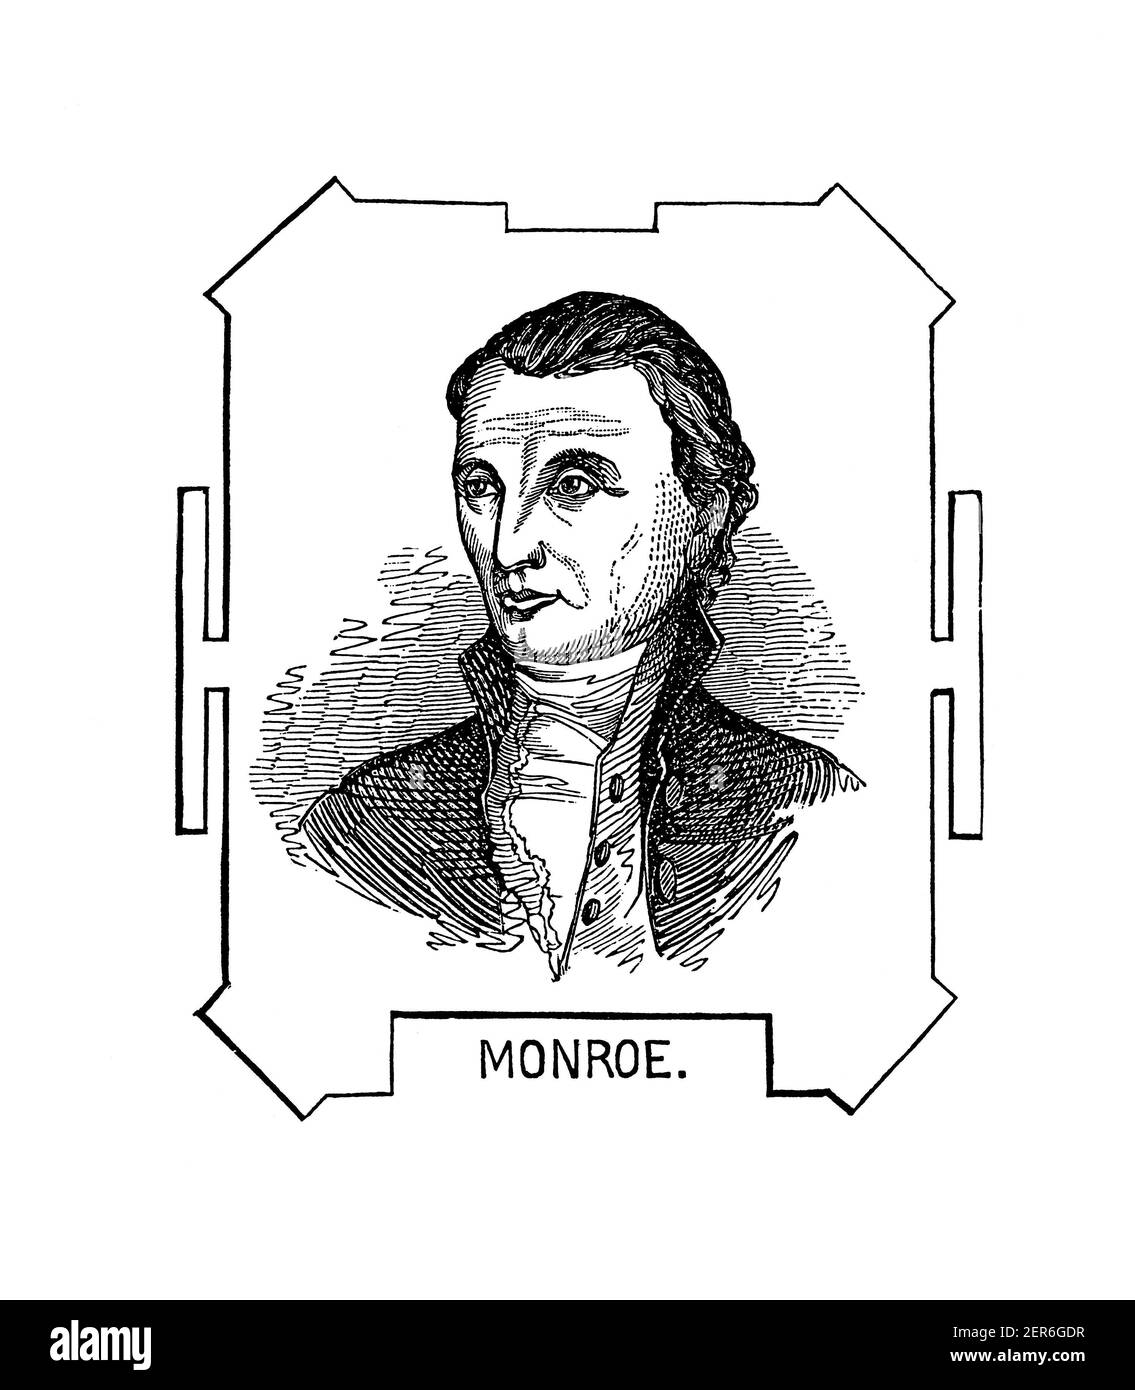 19th-century portrait of James Monroe, Founding Father and the fifth President of the United States. Illustration published in The Pictorial Life of G Stock Photo